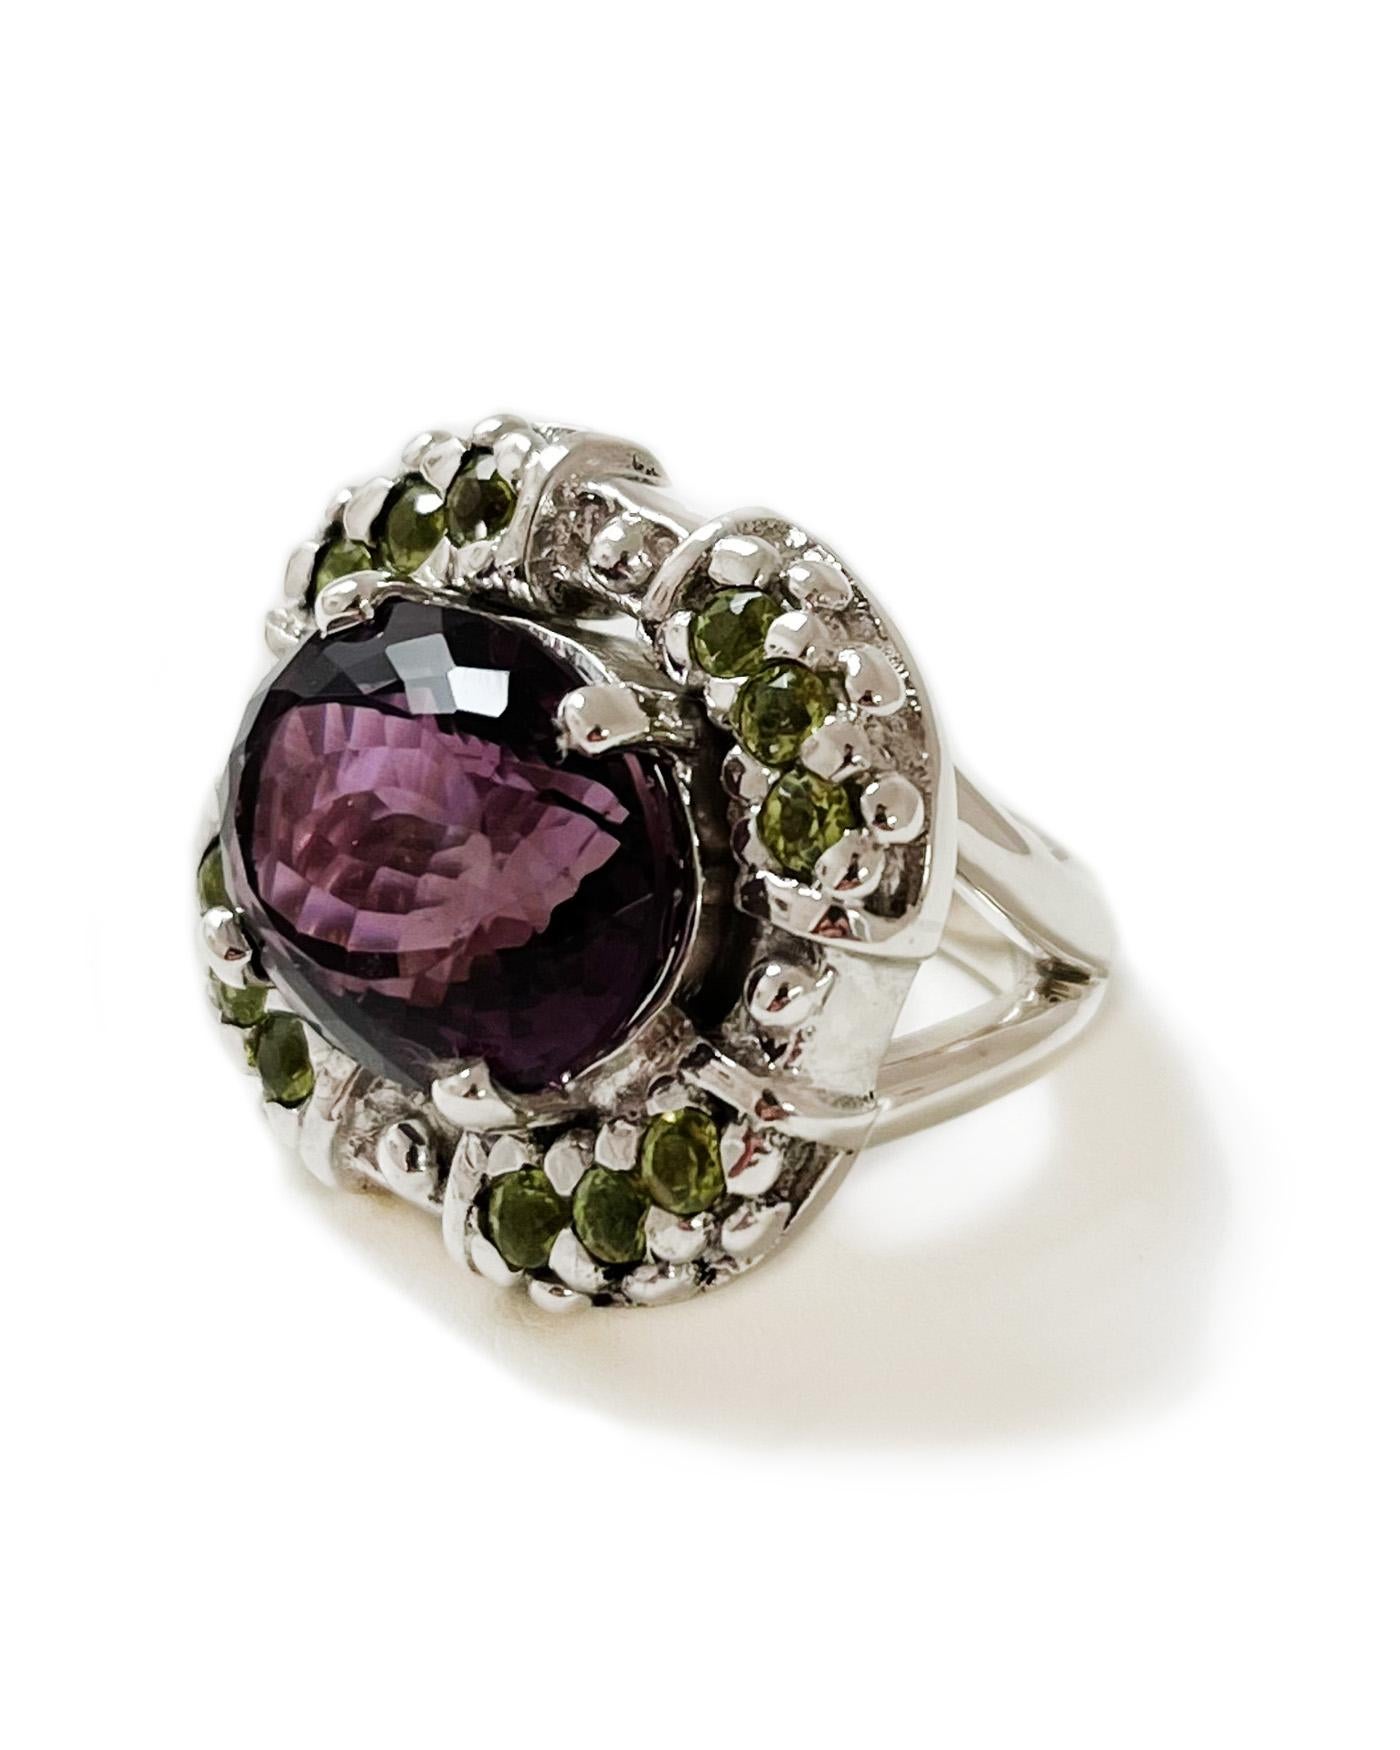 For Sale:  Sacha Ring in Amethyst, Peridot and Argentium Silver 2